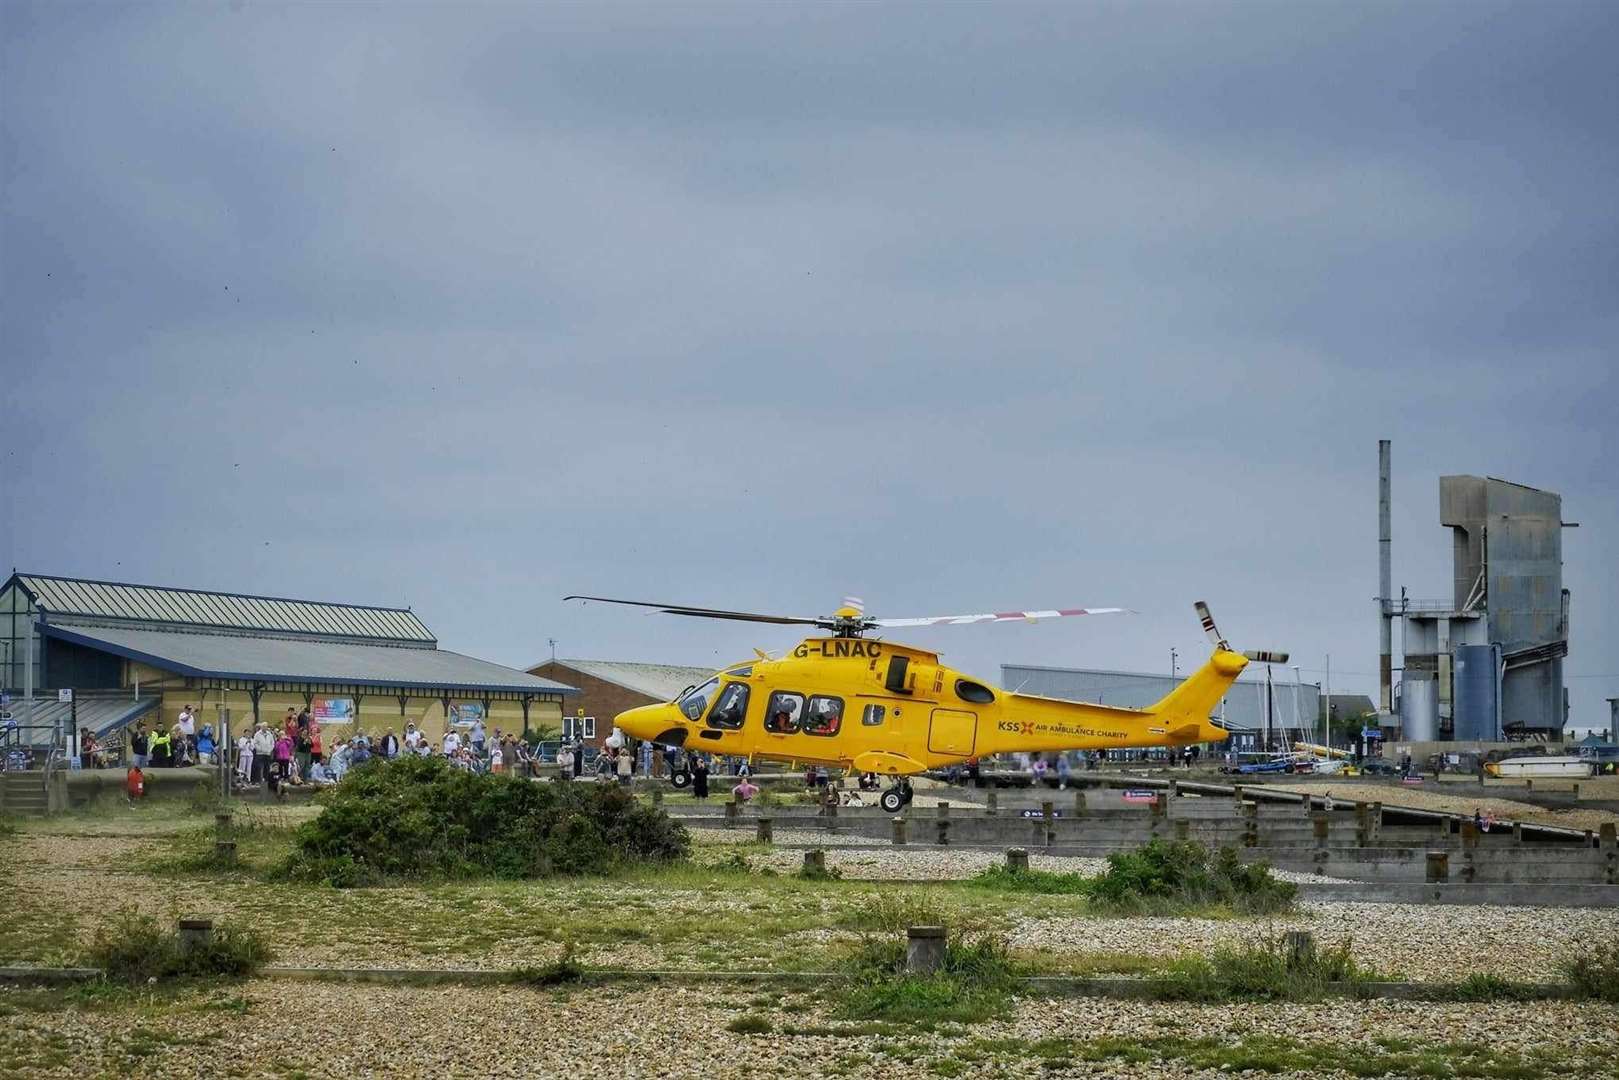 An air ambulance was also spotted near the scene. Picture: Tom Banbury